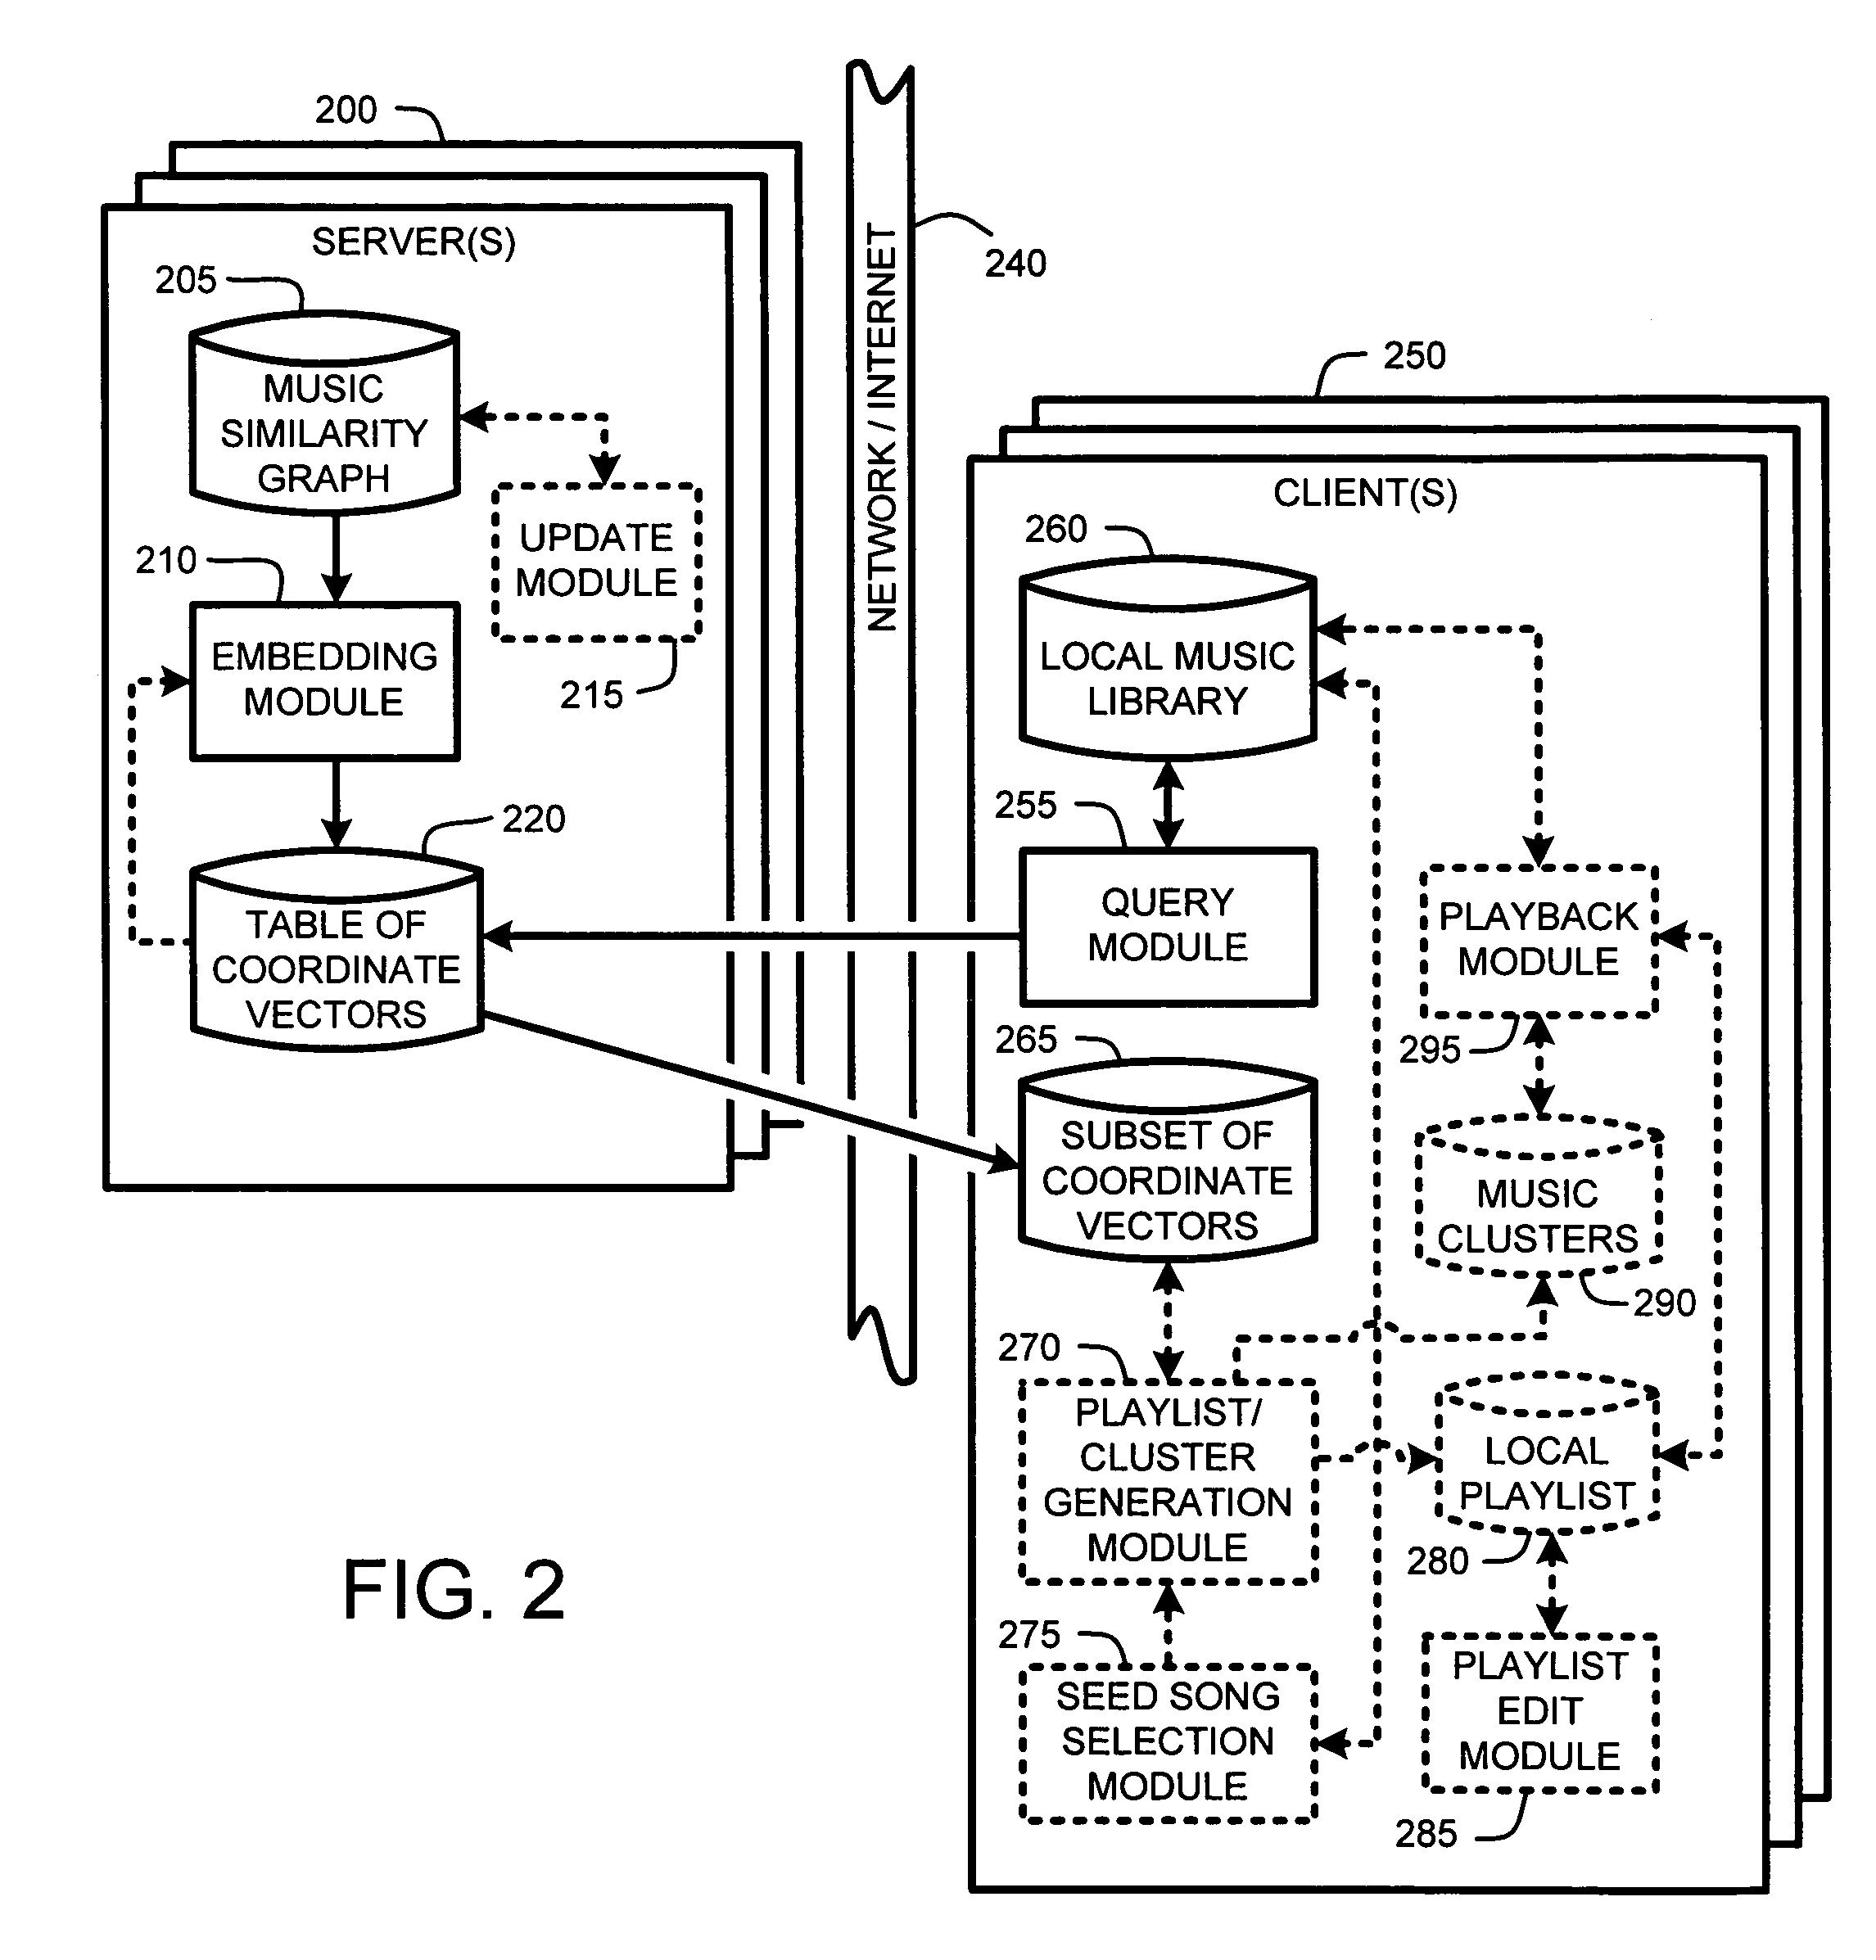 Client-based generation of music playlists from a server-provided subset of music similarity vectors